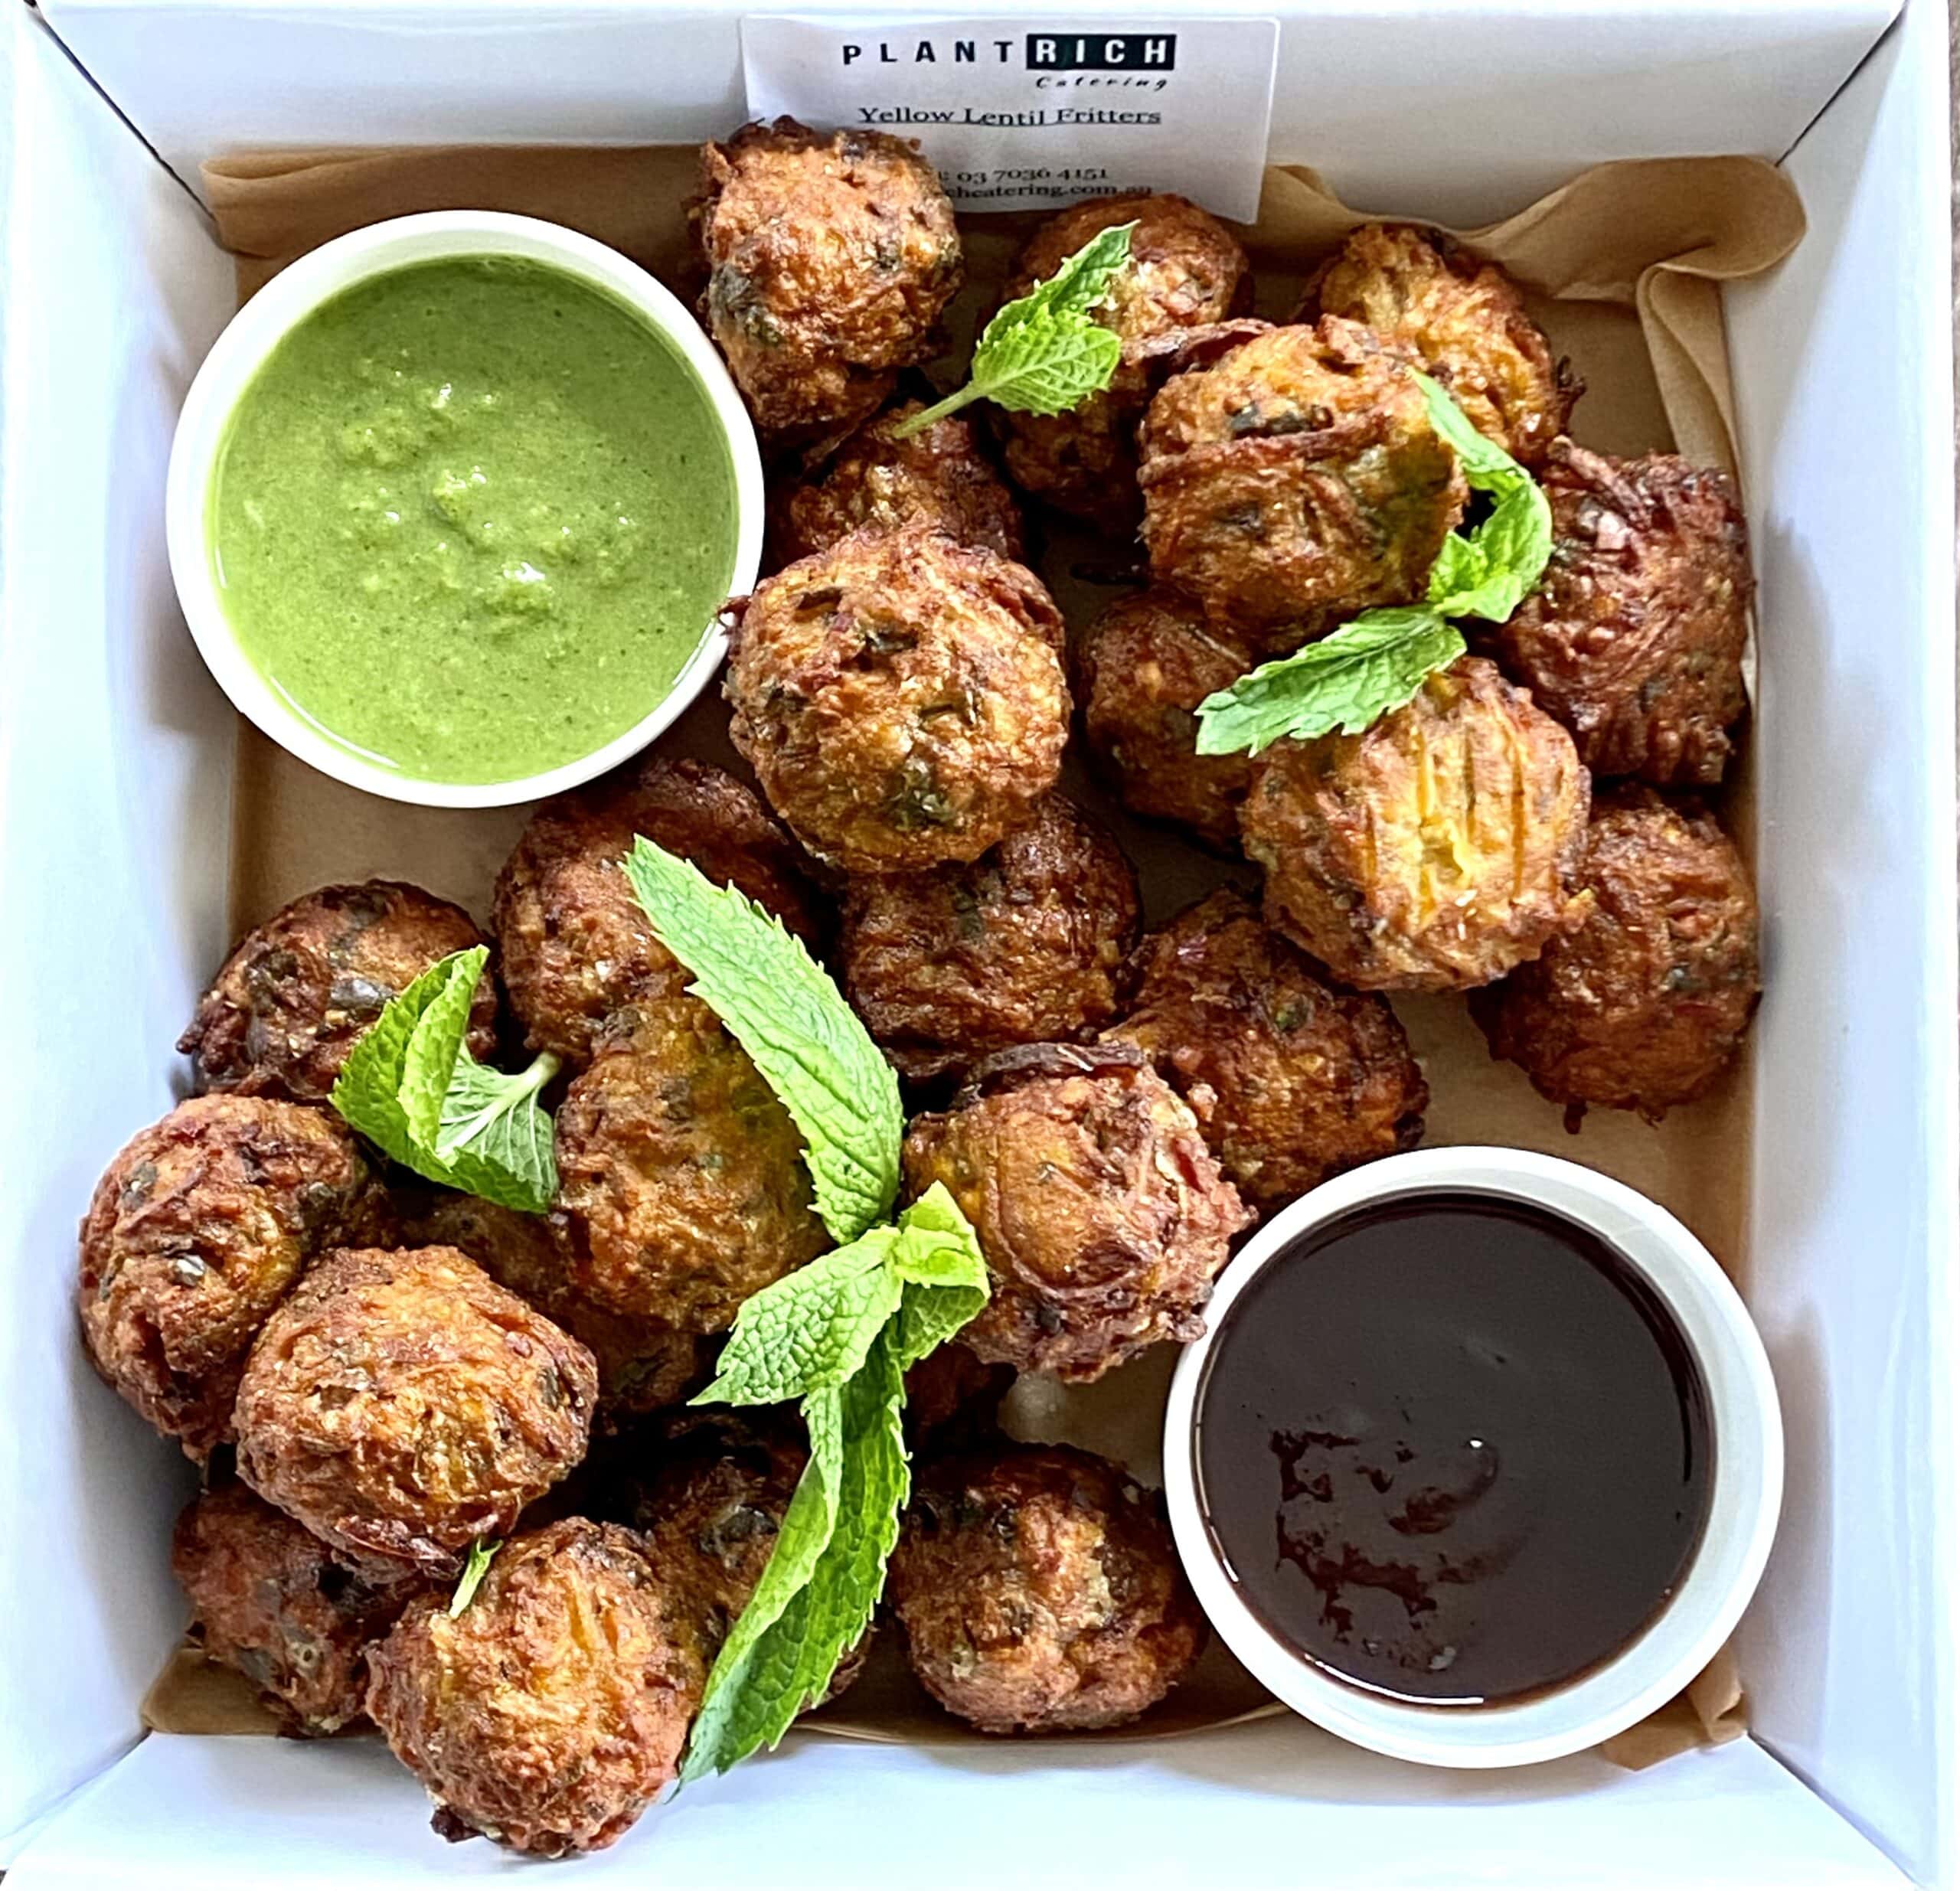 Yellow Lentils and Onion Fritters, Tamarind Sauce